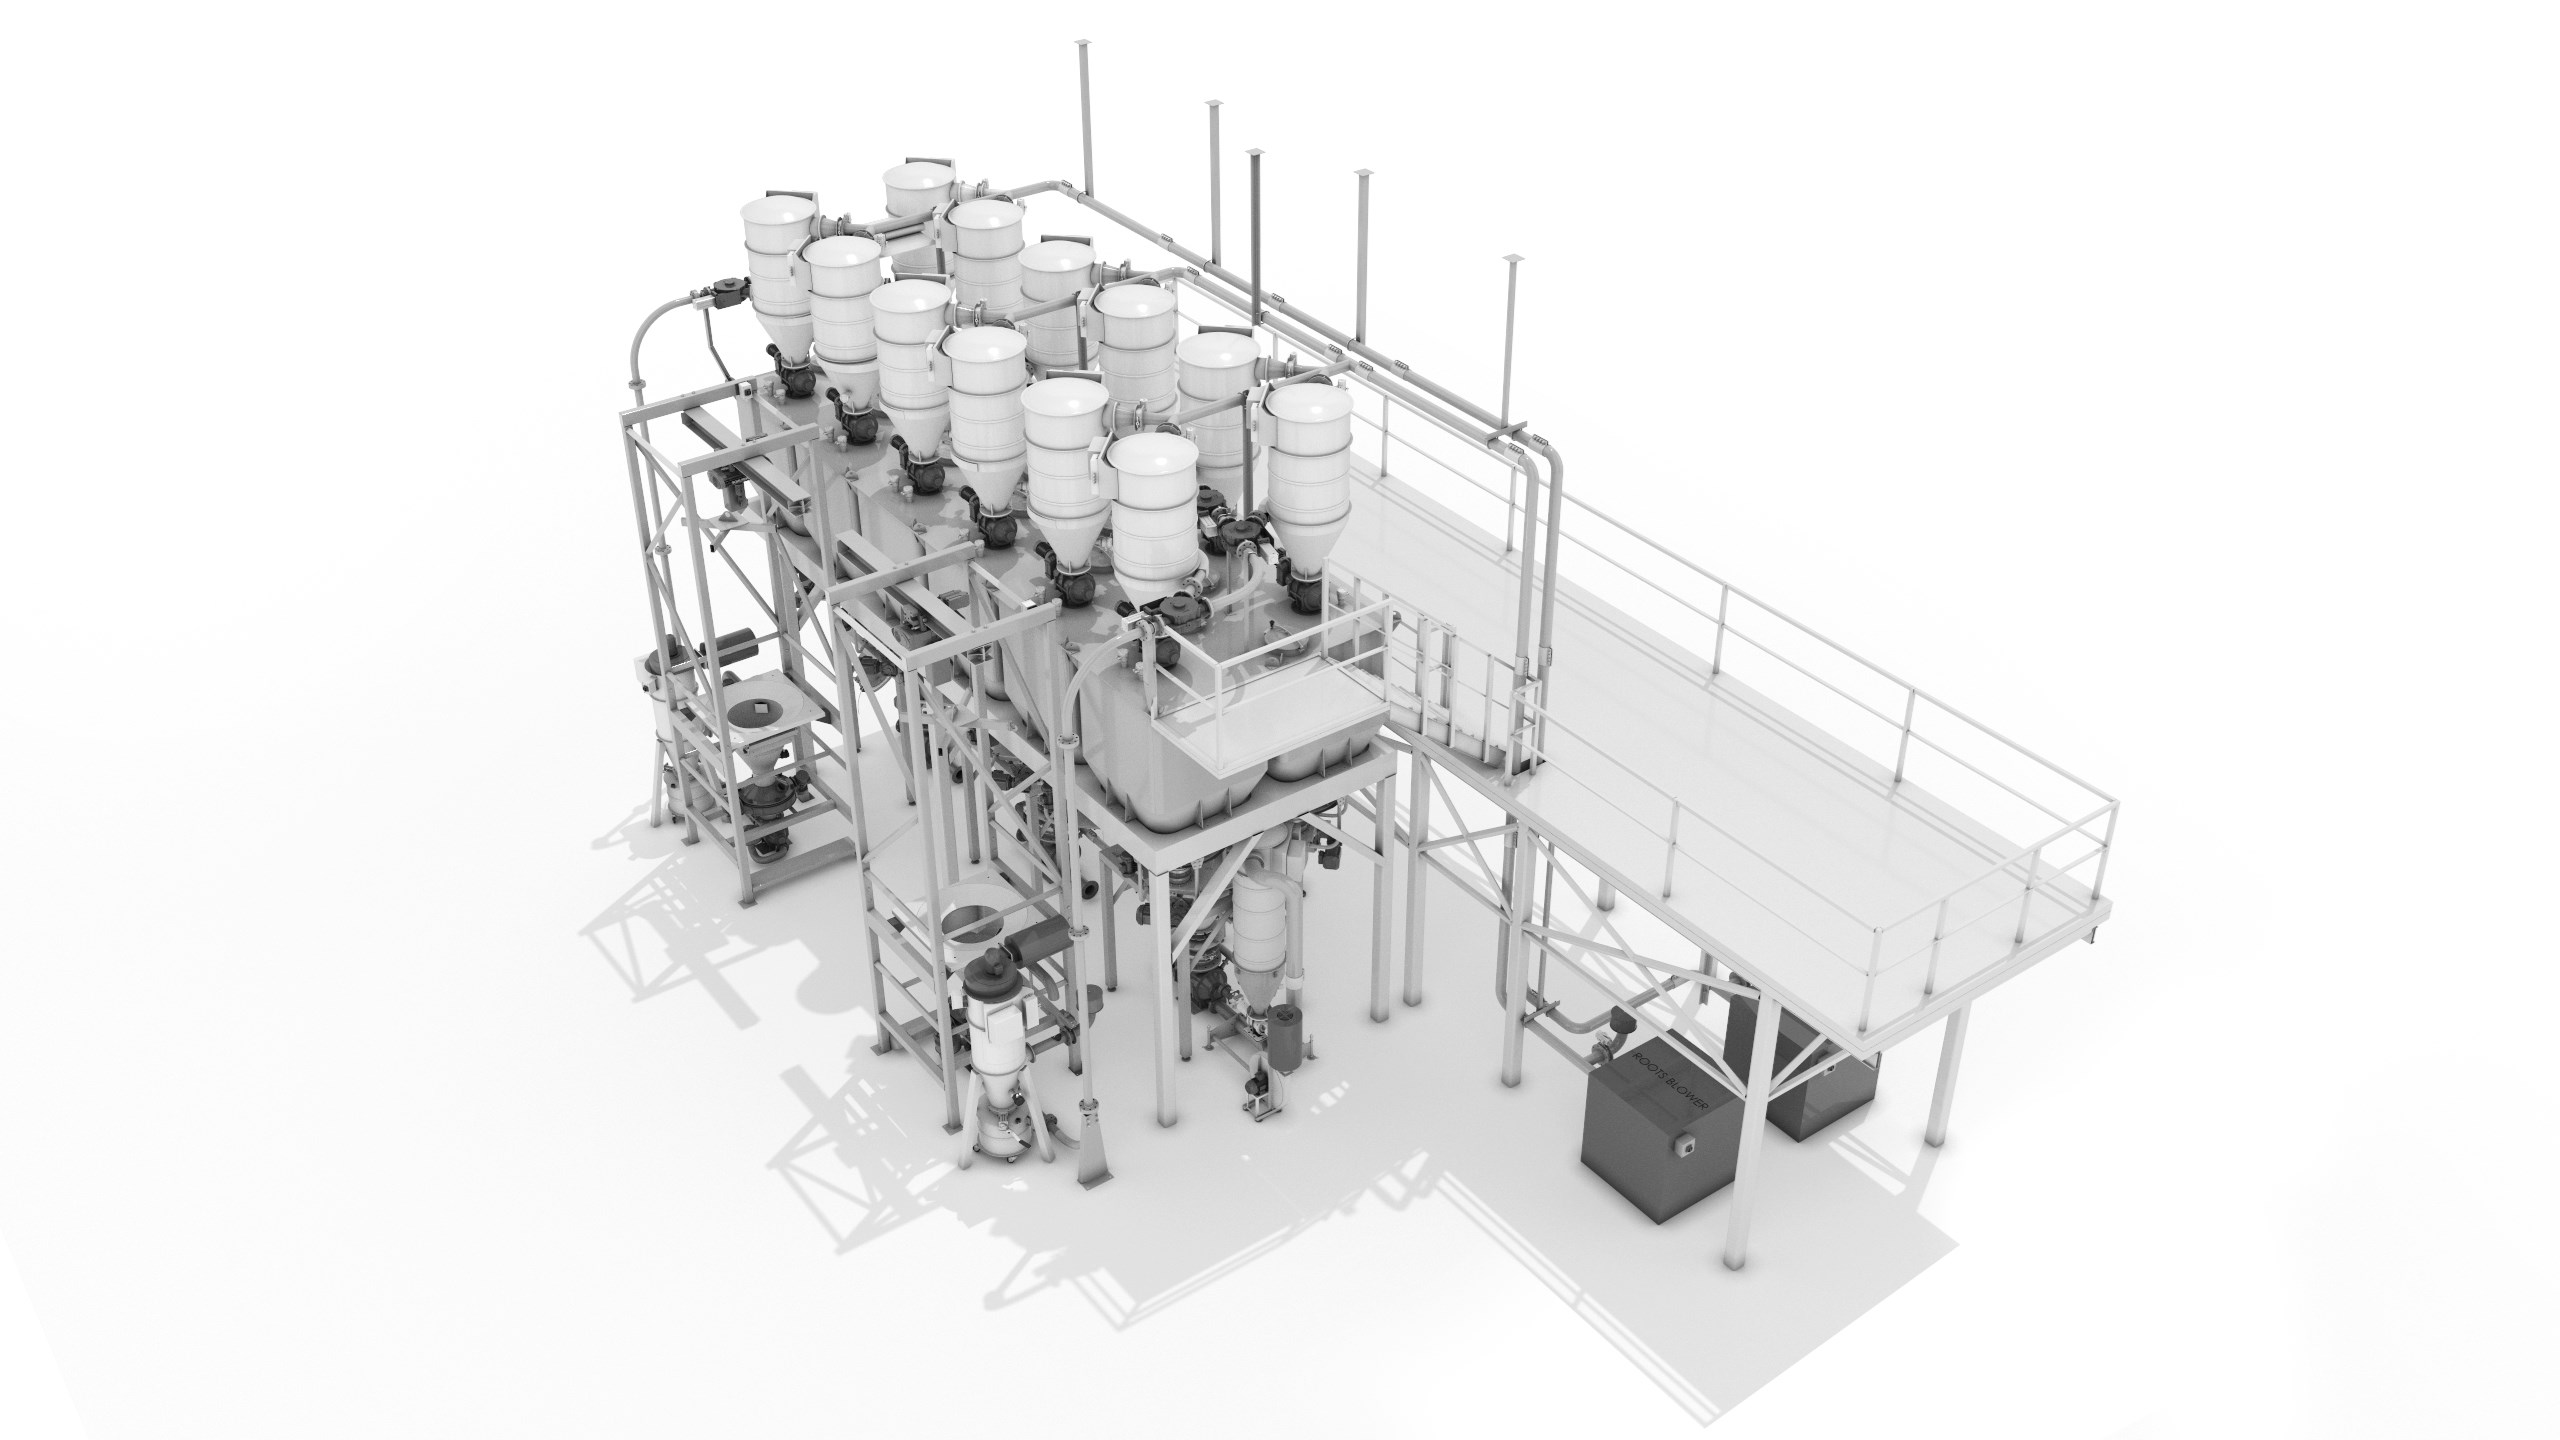 Custom, full-system food processing solutions and applied technology platforms designed, engineered, installed, and managed from start to finish. Image